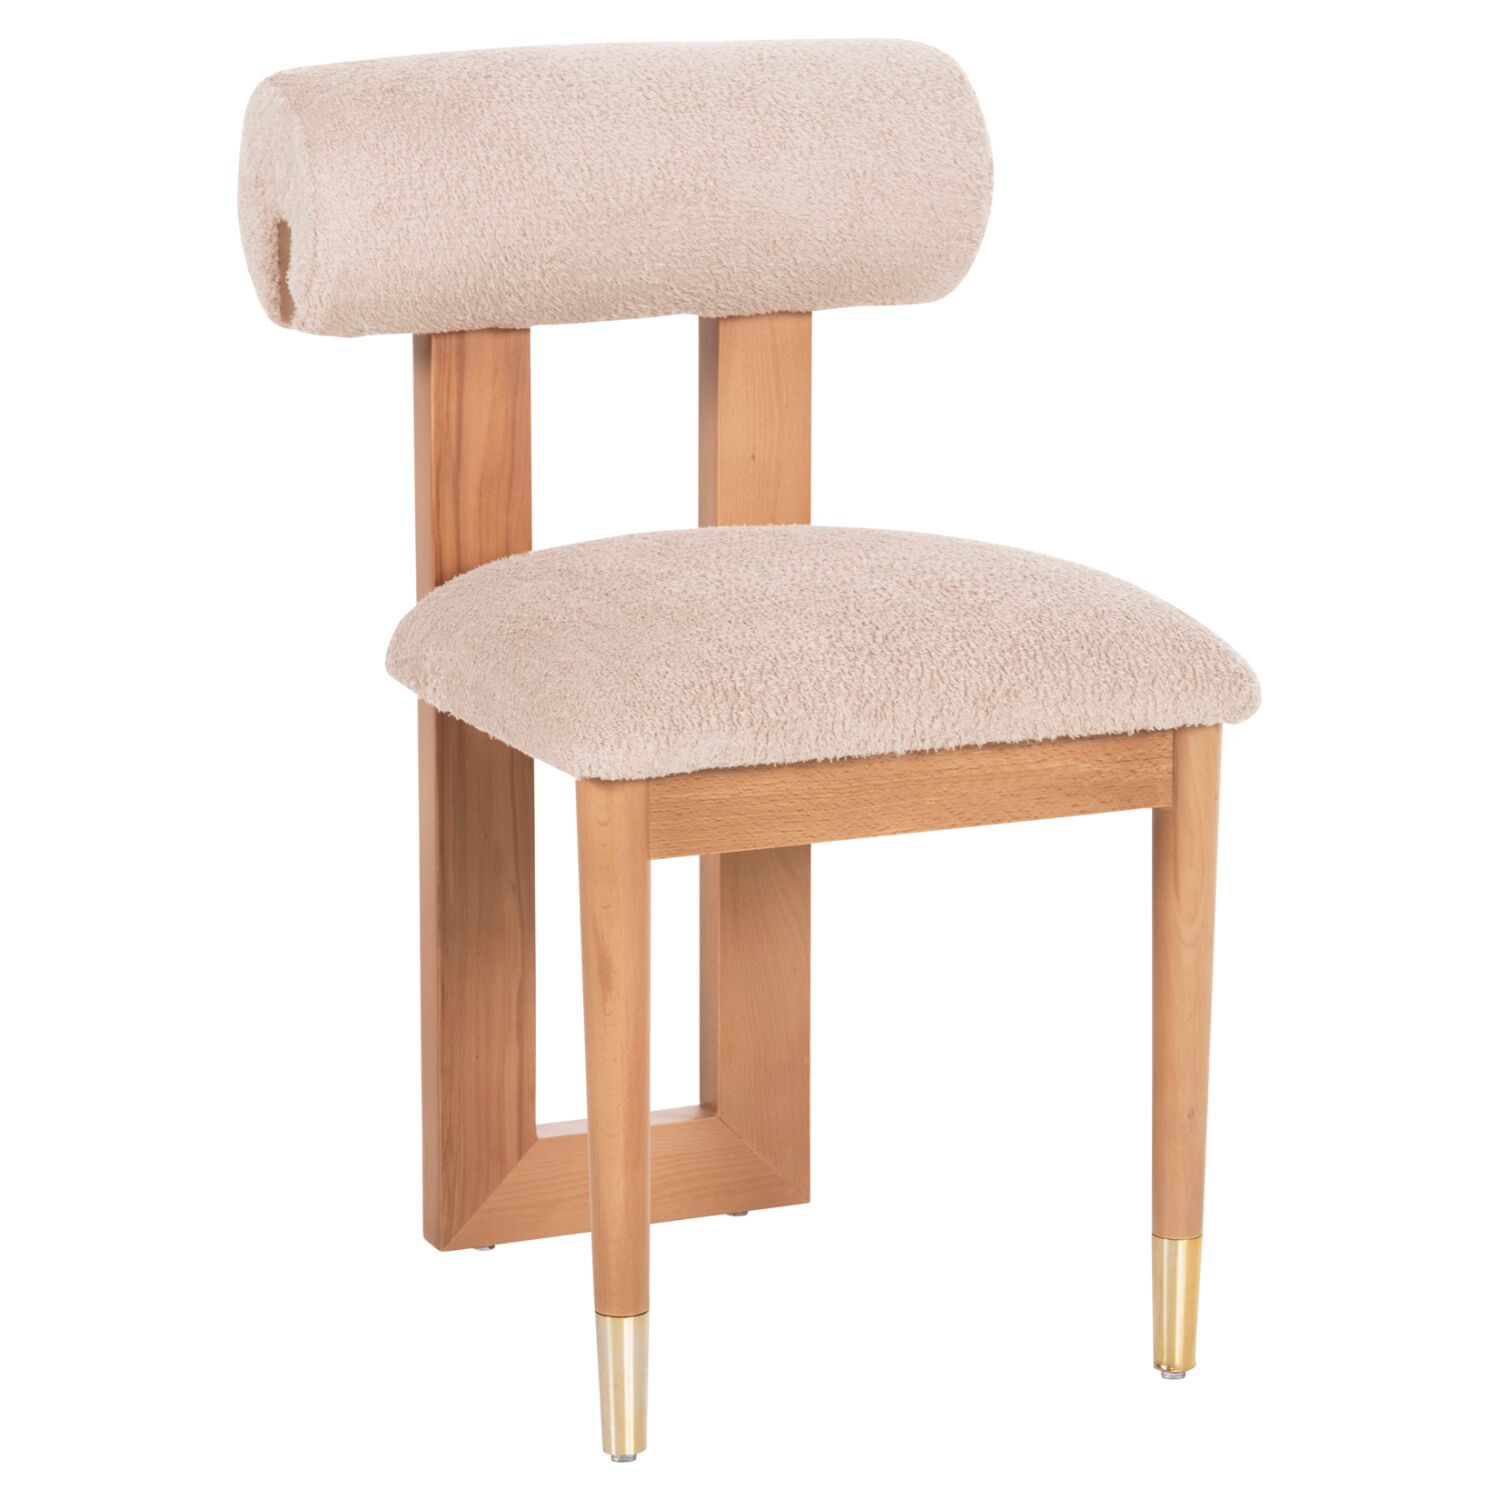 DINING CHAIR TONDELLA HM18148.16 BEECH WOOD IN NATURAL-BOUCLE FABRIC IN BEIGE 47x58x81Hcm.